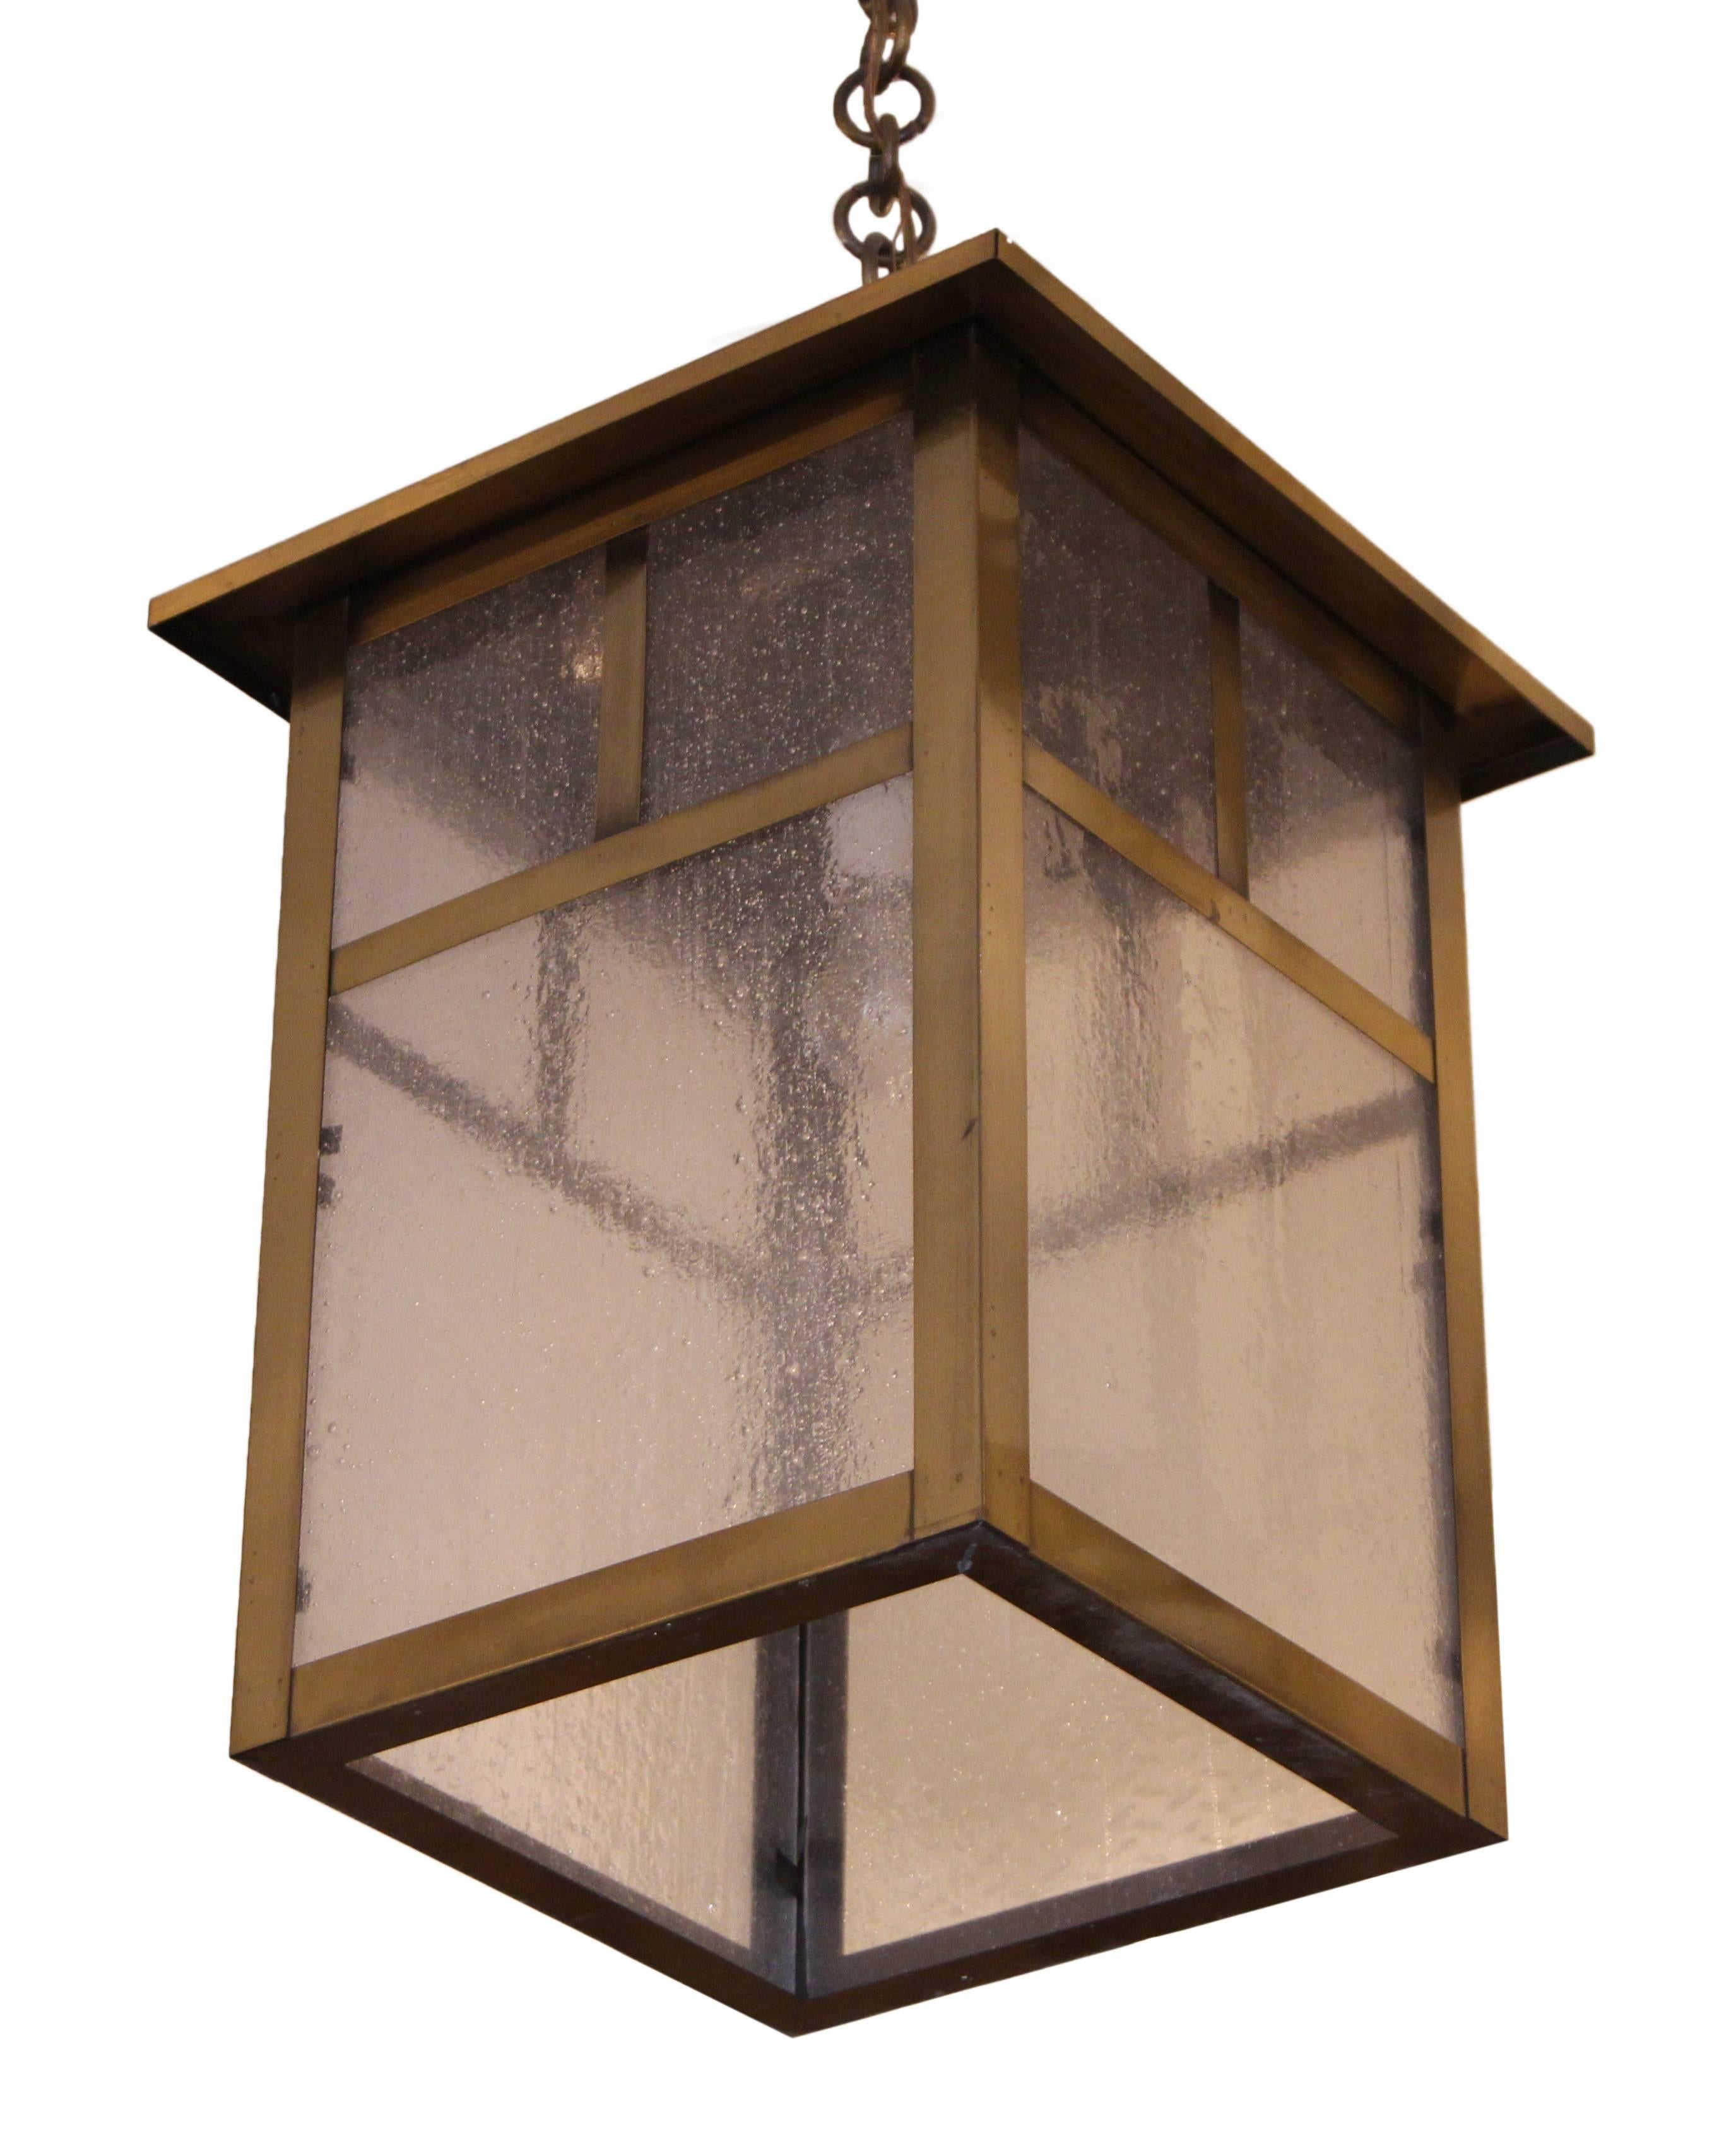 1980s Arts and Crafts brass lantern with textured clear glass. Requires one bulb. This item can be viewed at our 5 East 16th St, Union Square location in Manhattan.